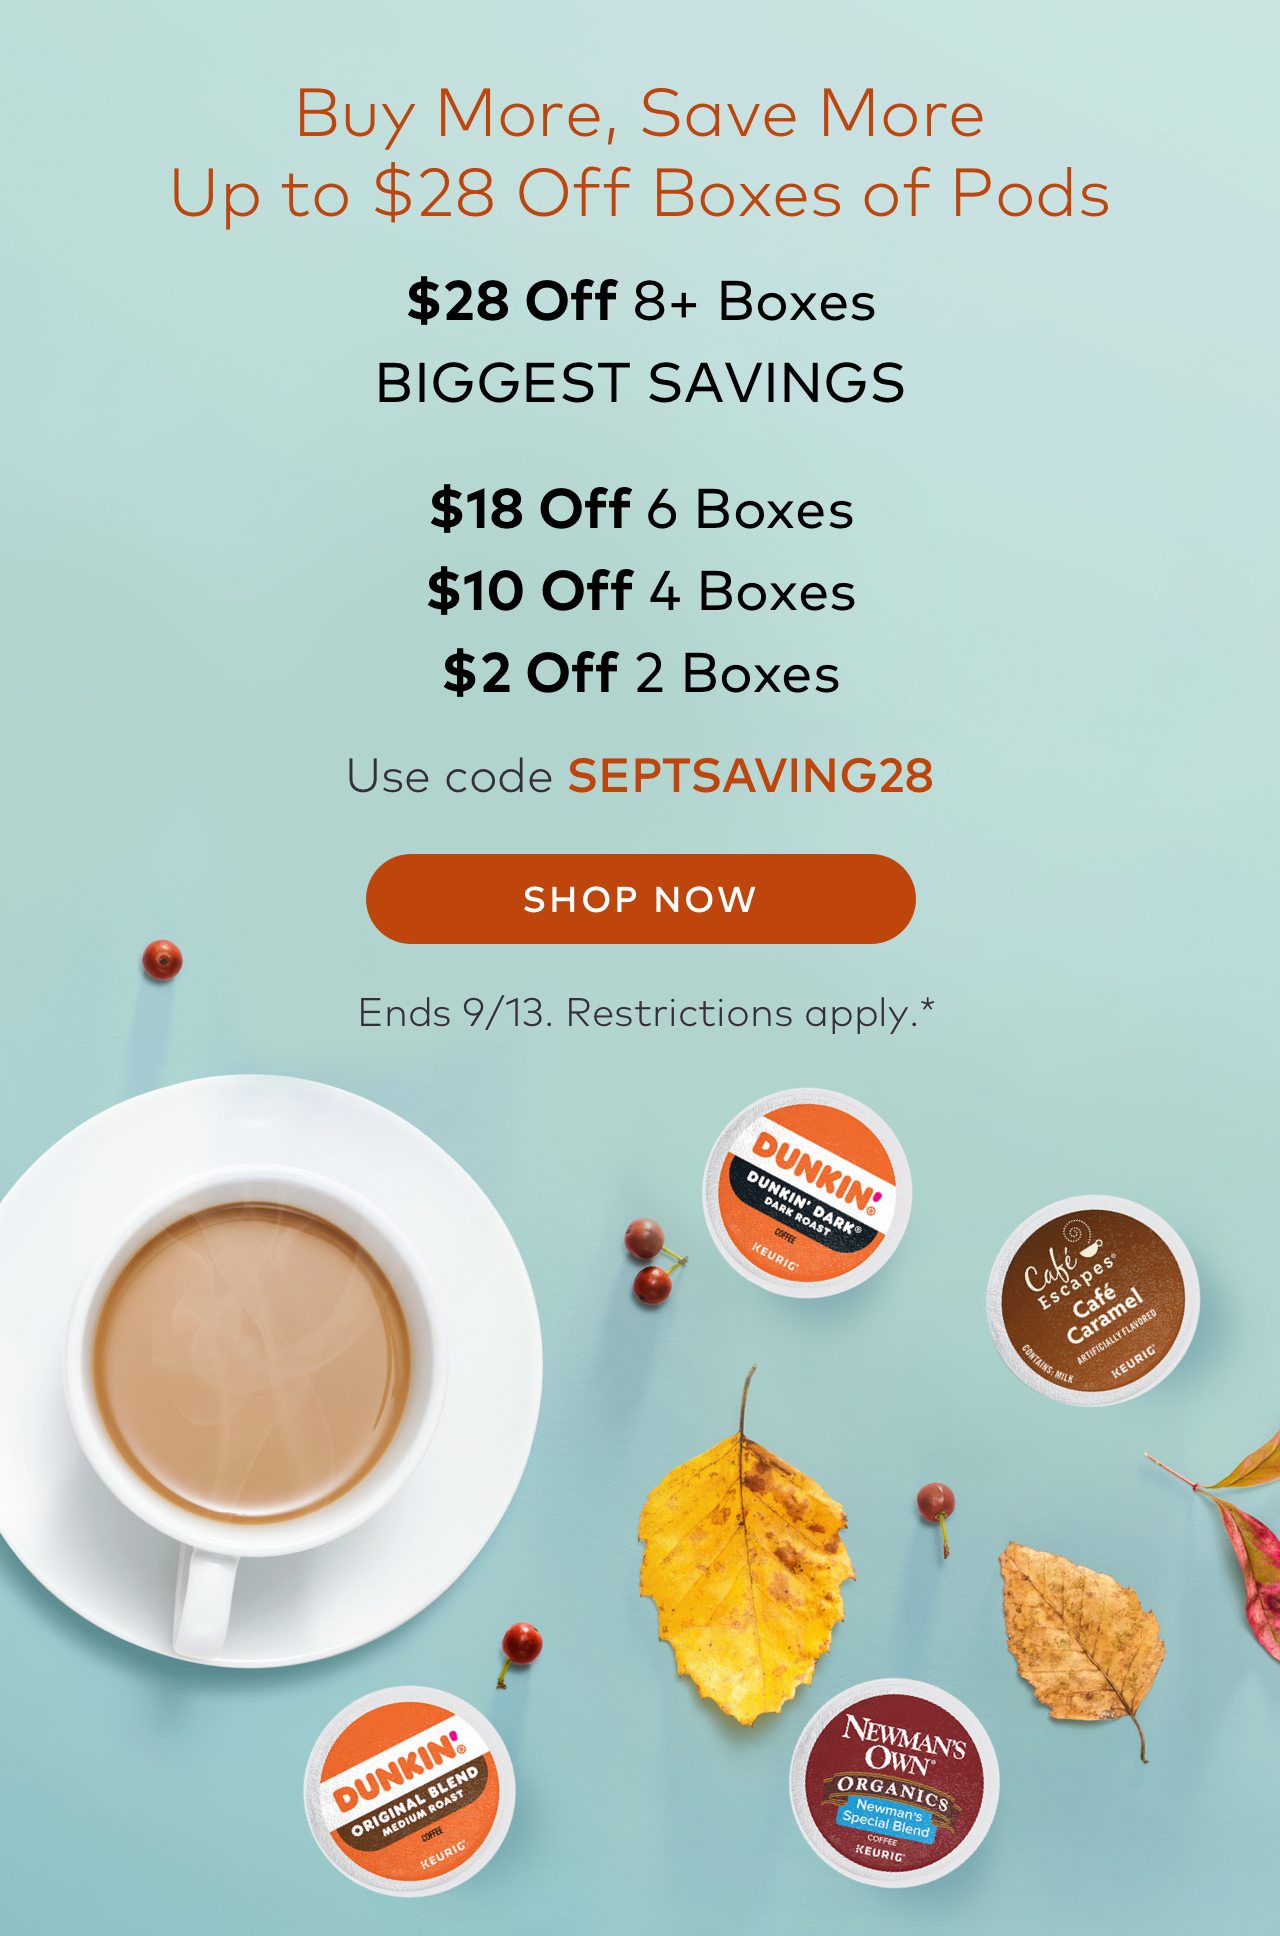 Buy more save more save up to $28 on boxes of pods with code SEPTSAVING28